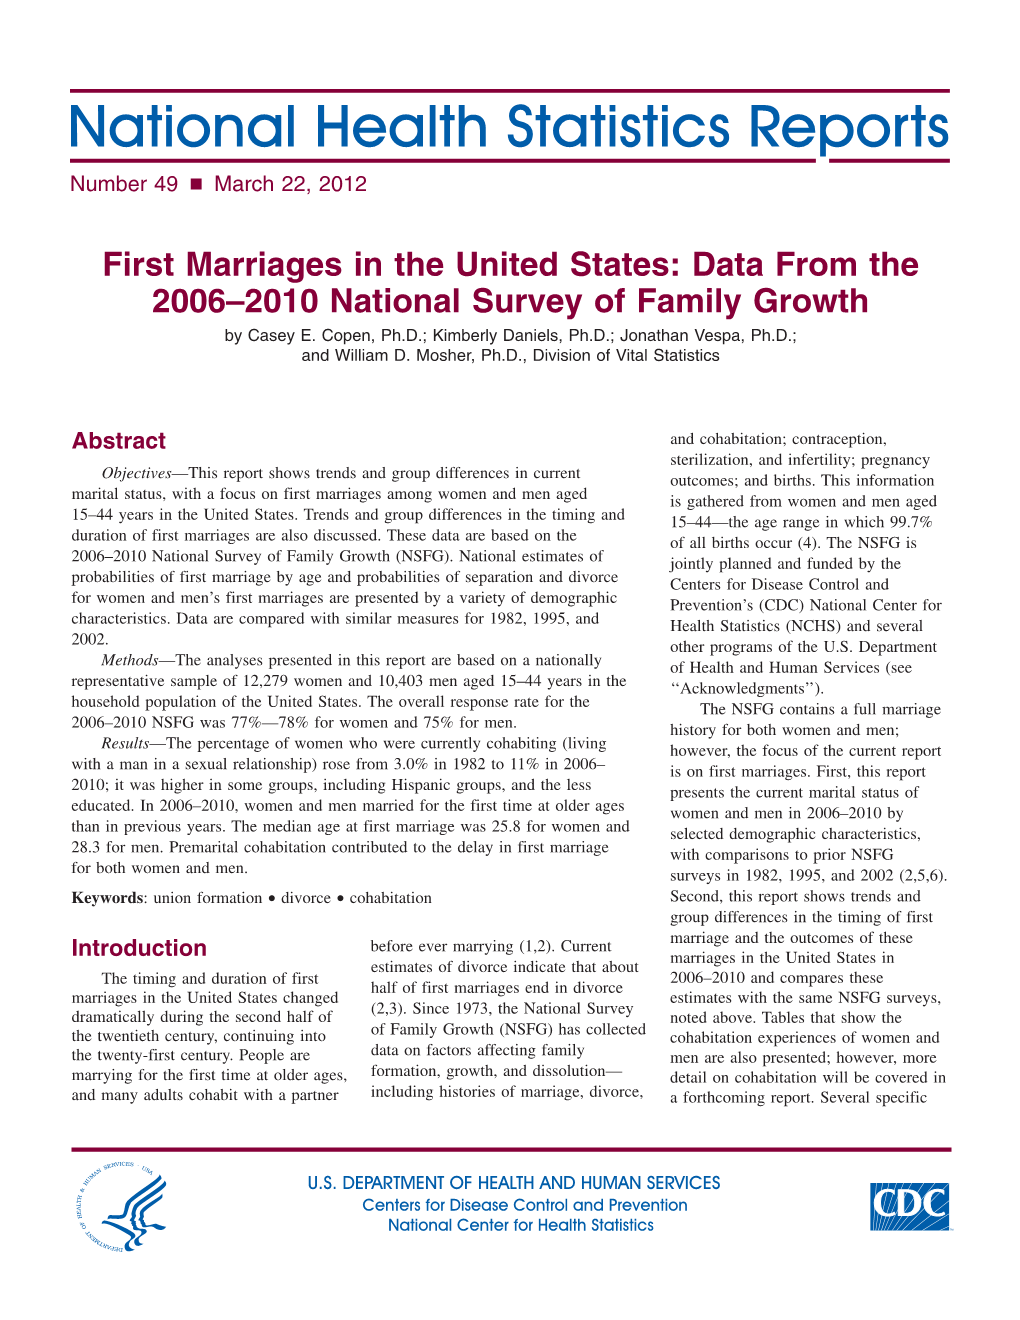 First Marriages in the United States: Data from the 2006-2010